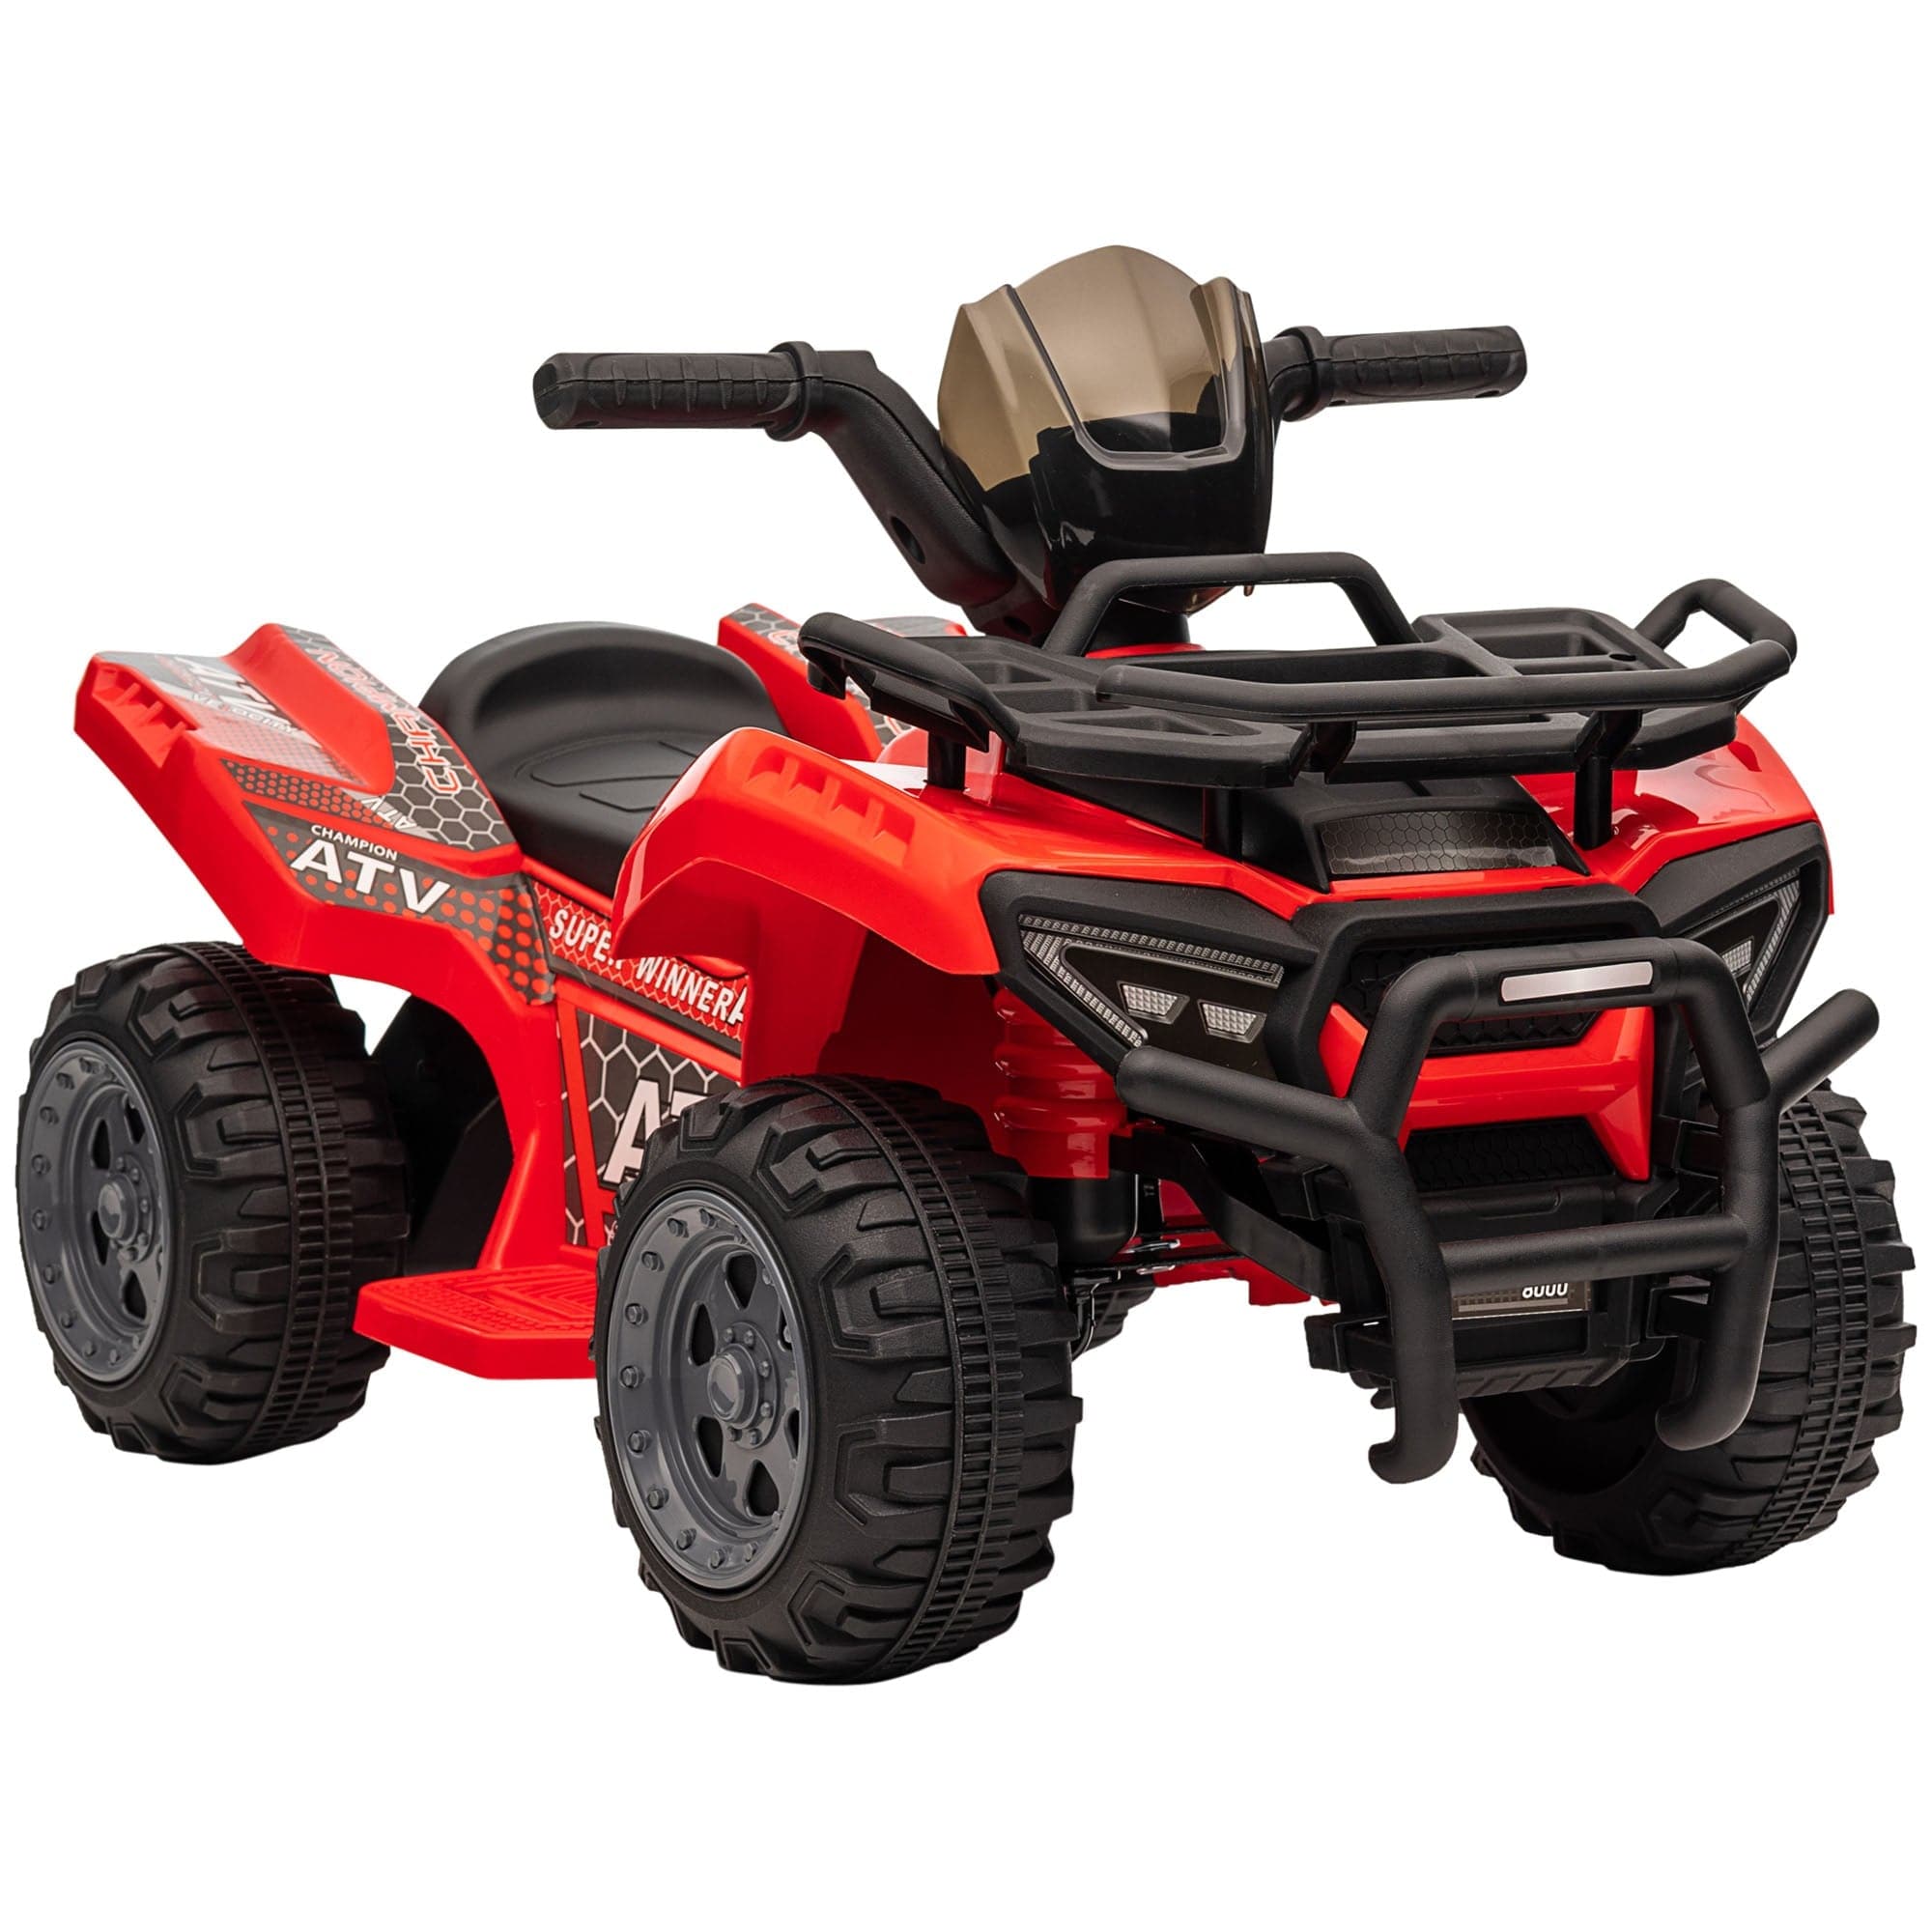 Maplin Plus 6V Kids Electric Ride on Toy ATV Quad Bike with Music & Headlights for 18-36 Months (Red)